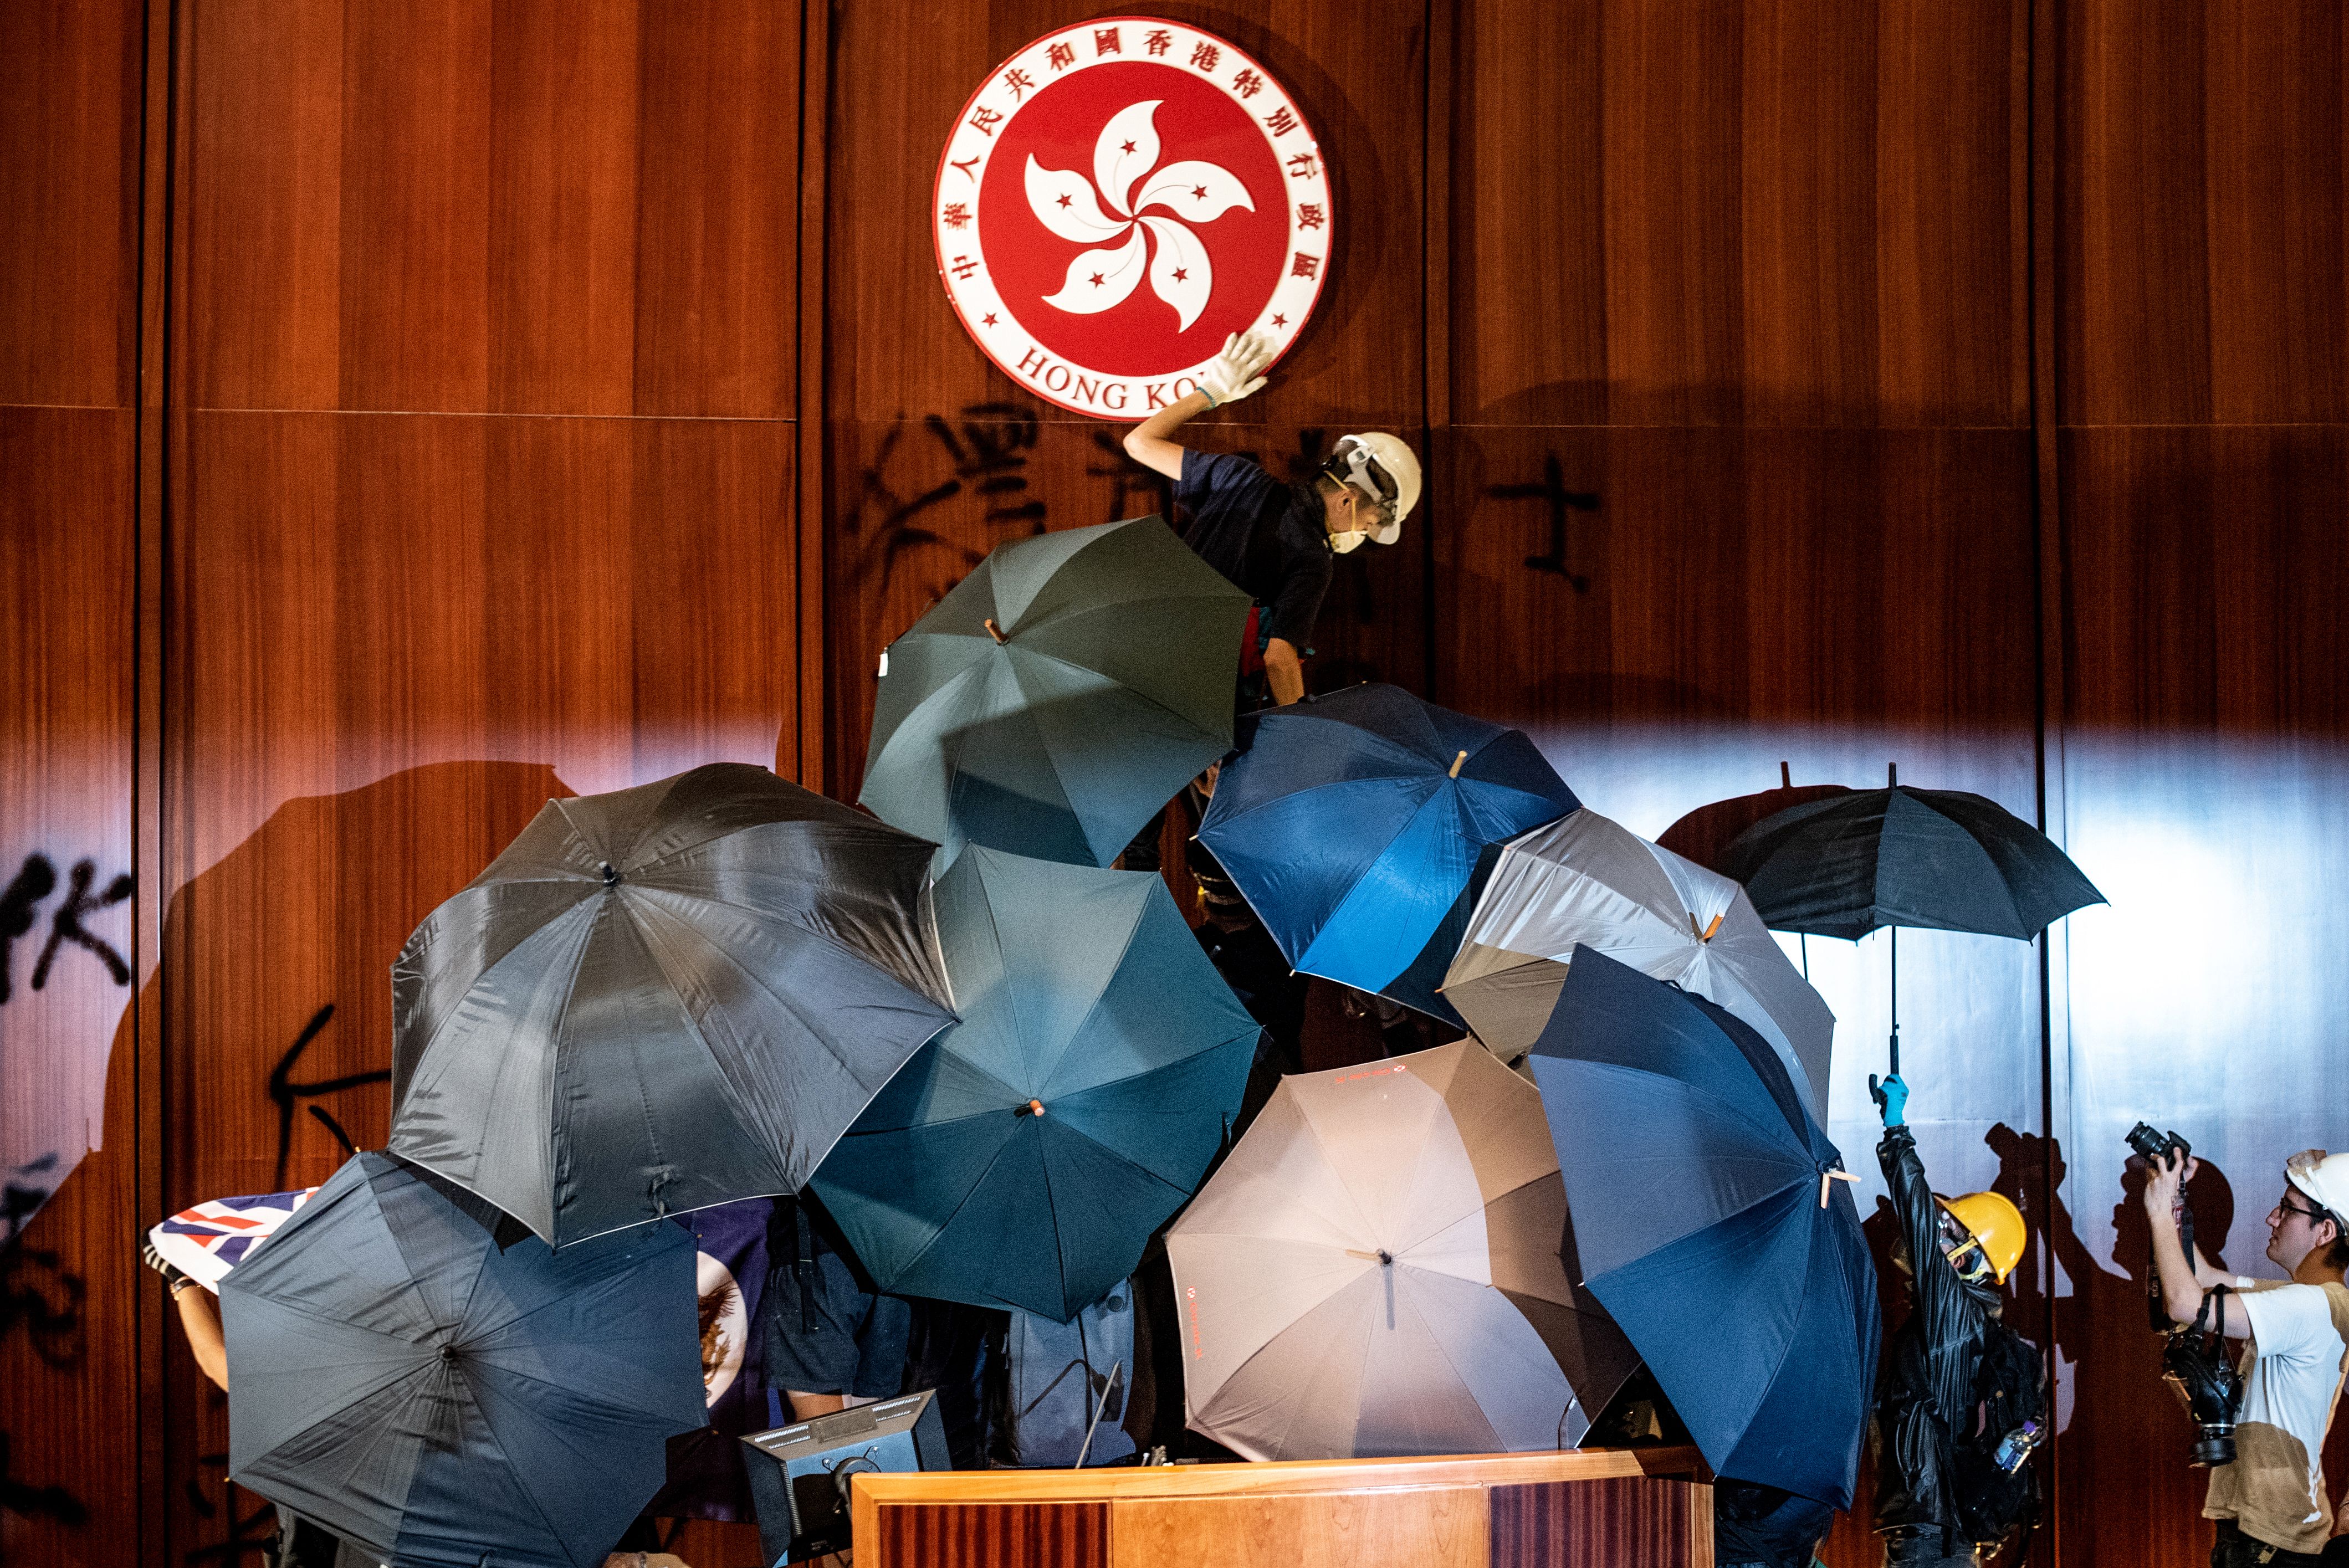 A protester defaces the Hong Kong emblem after protesters broke into the government headquarters in Hong Kong on July 1.